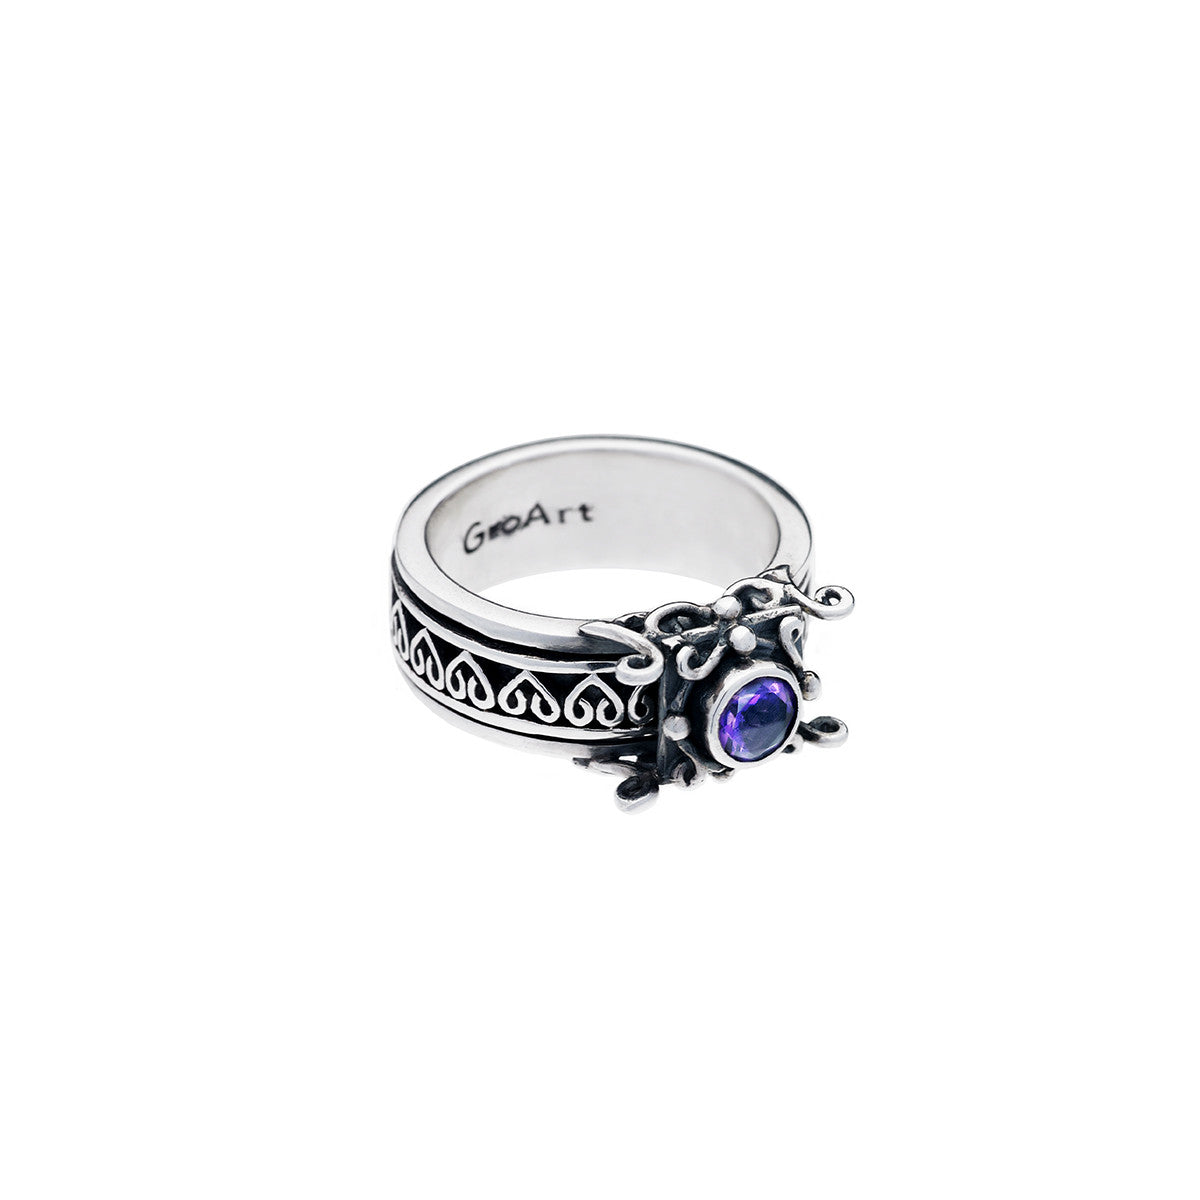 Art Nouveau Sterling Silver And Amethyst Spin Ring - Cynthia Gale New York Jewelry